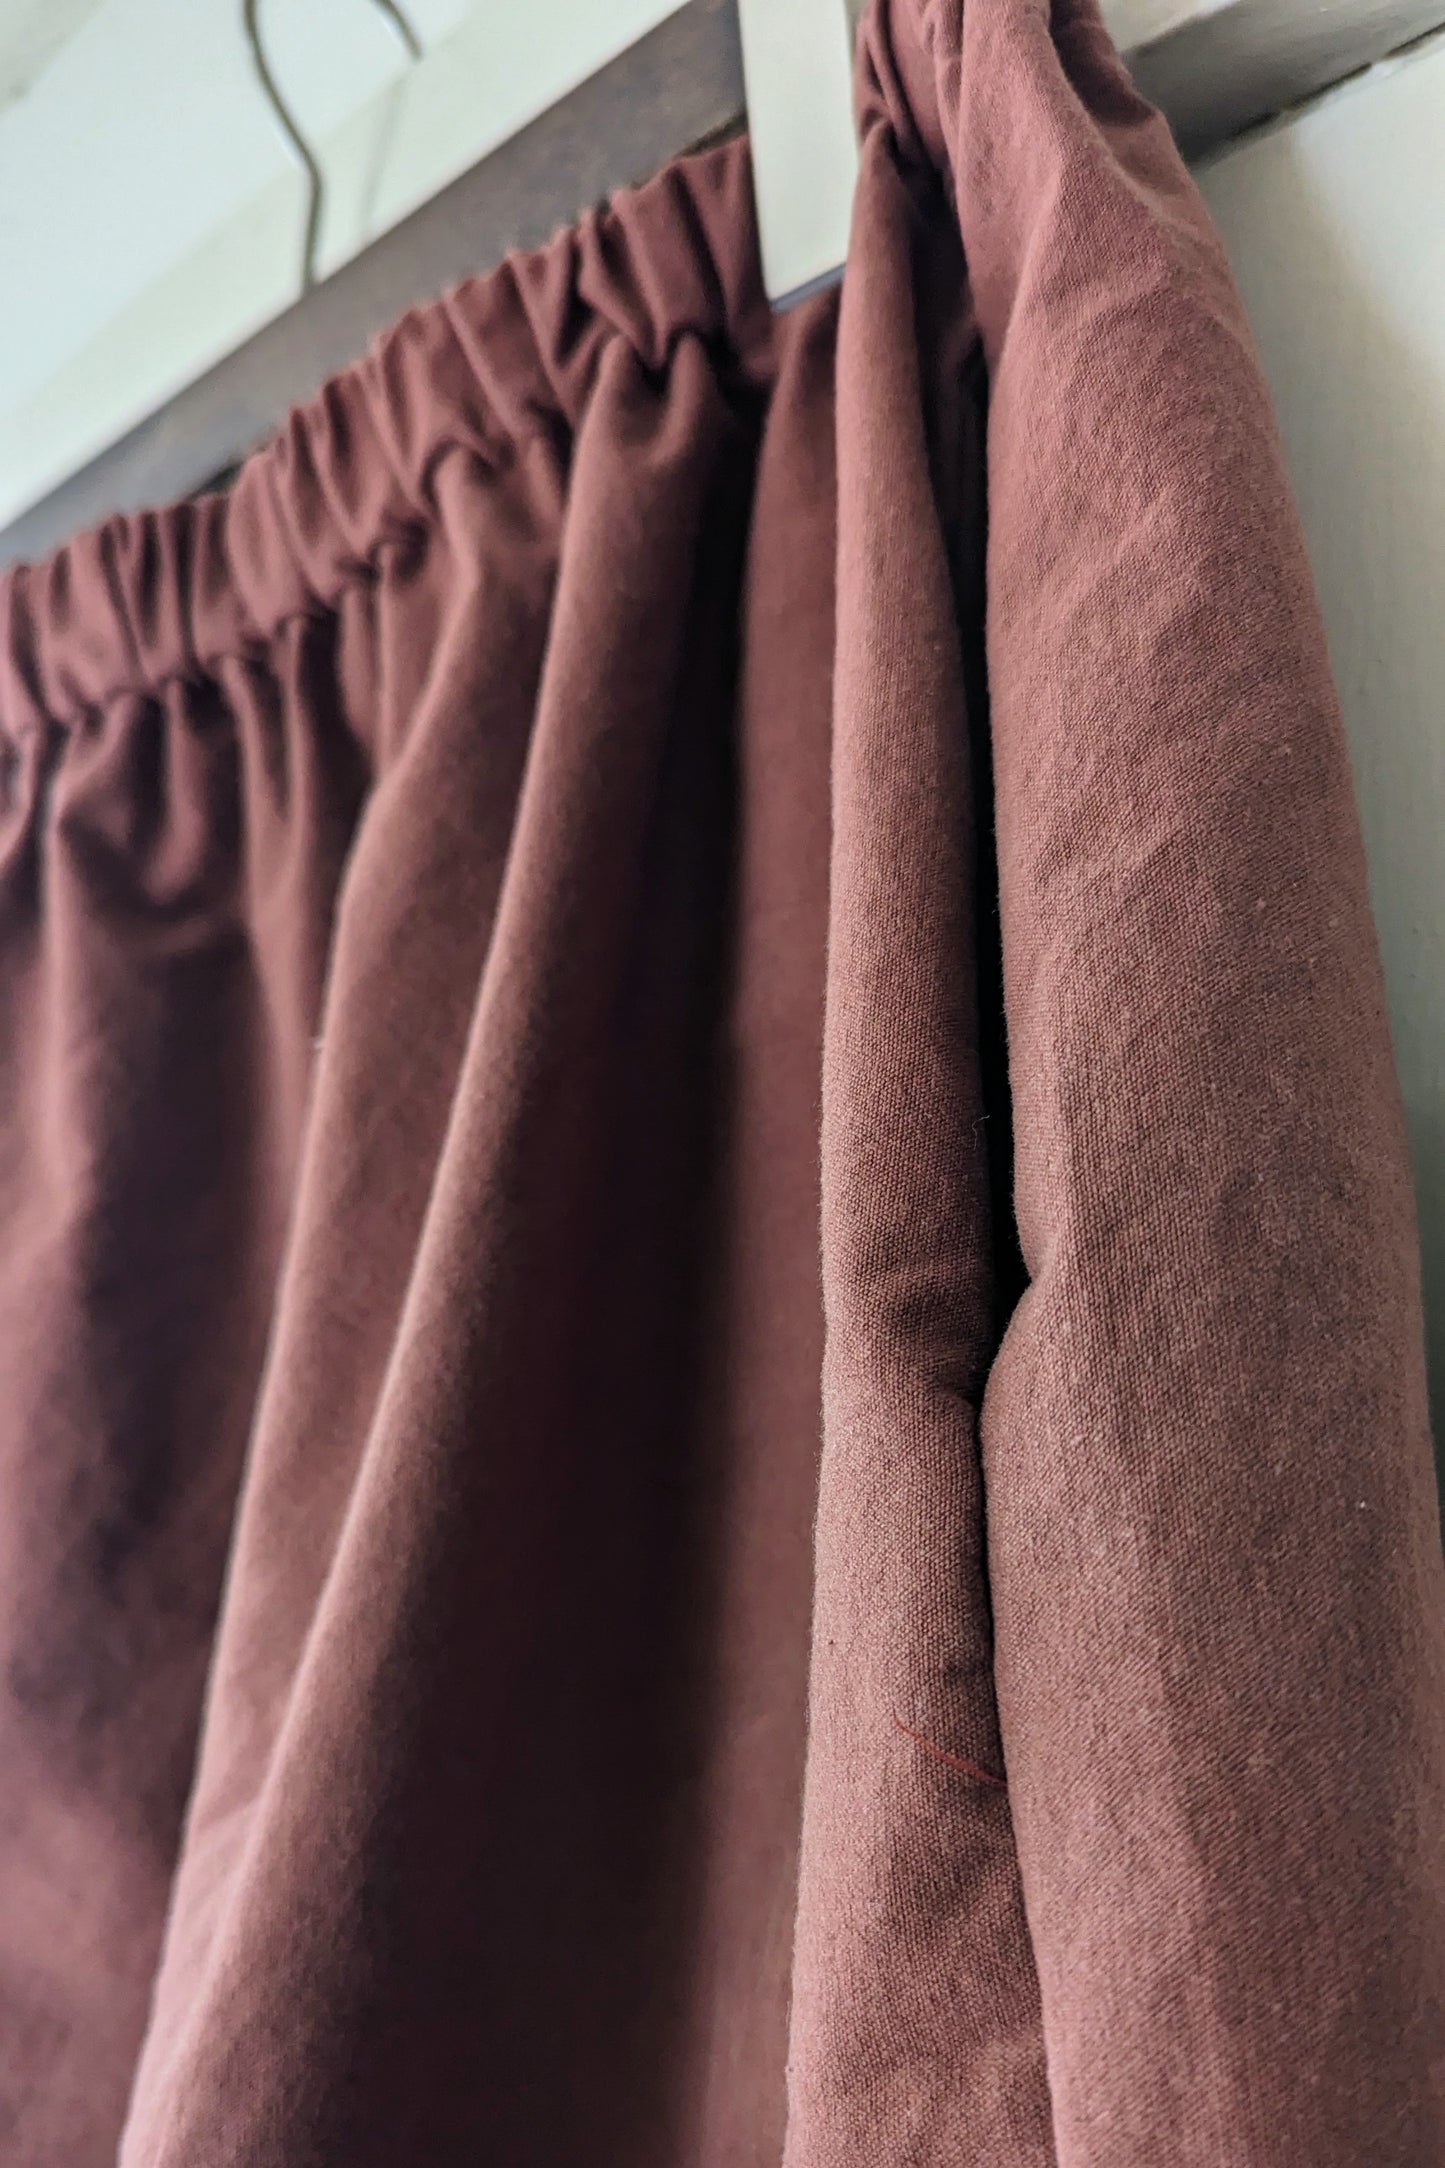 A-Line Skirt in Redwood Organic Brushed Cotton by Connally Goods